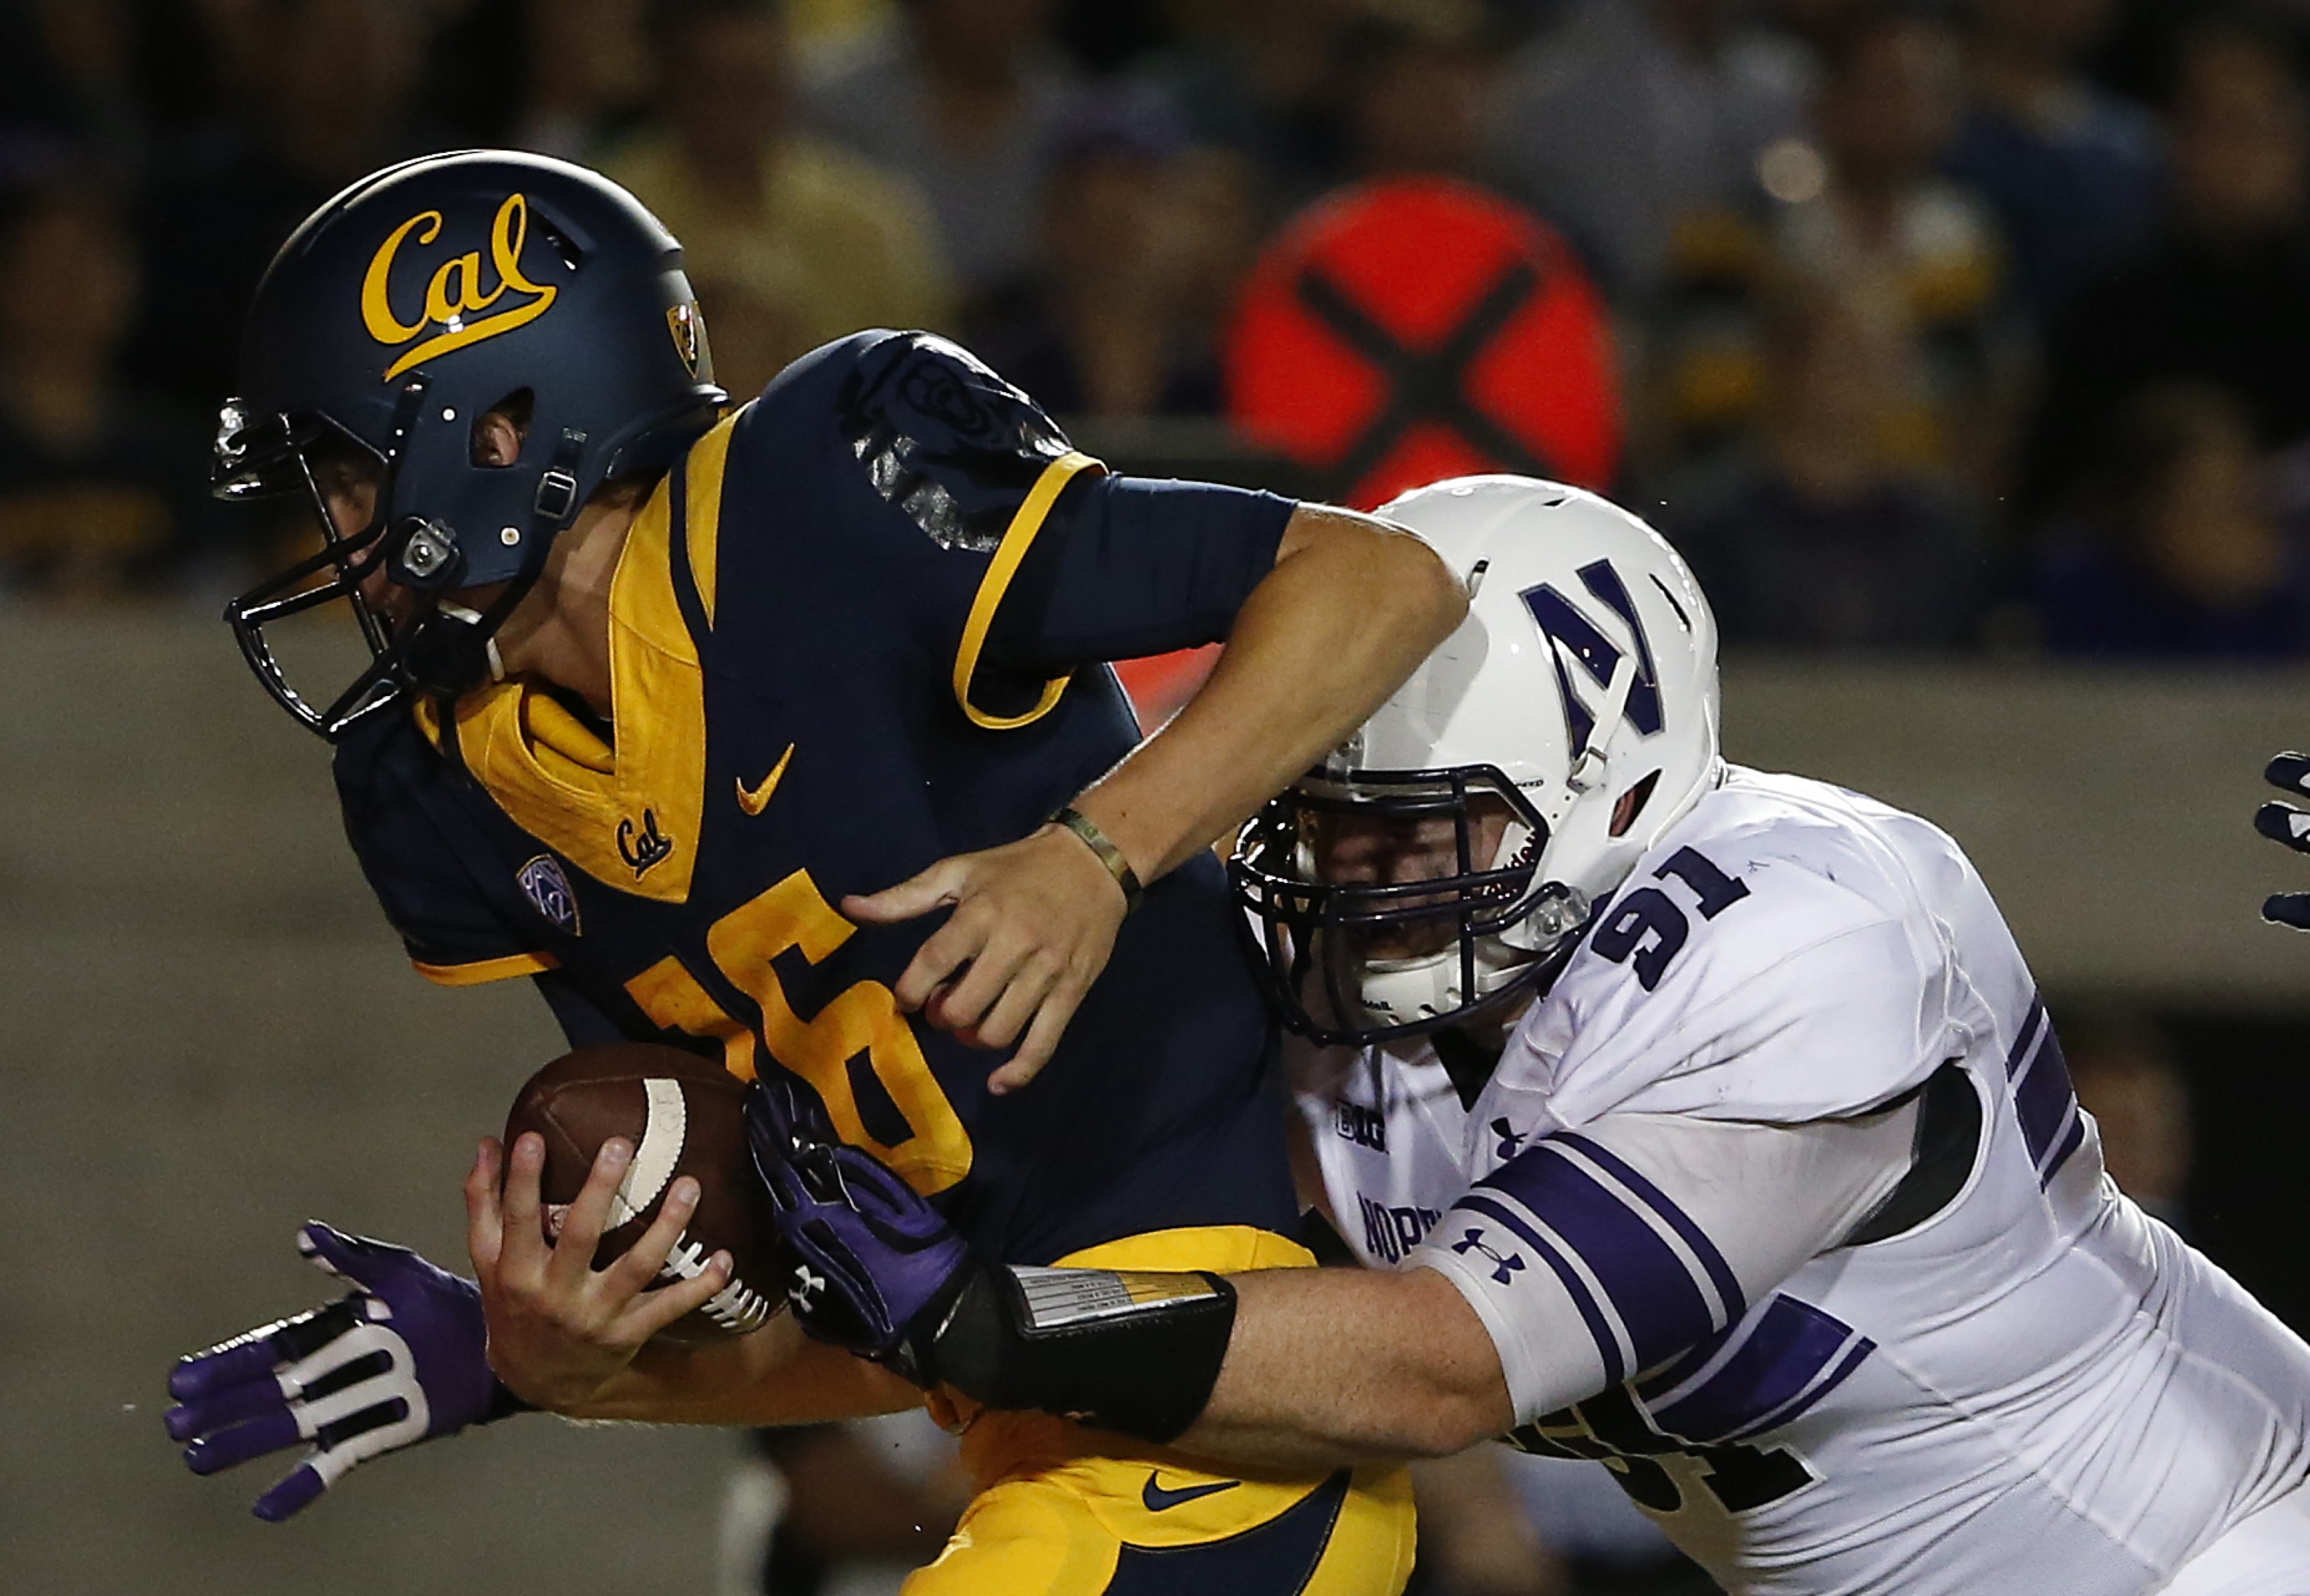 BERKELEY, CA - AUGUST 31: Sean McEvilly #91 of the Northwestern Wildcats pressures quarterback Jared Goff #16 of the California Golden Bears during the first period on August 31, 2013 at California Memorial Stadium in Berkeley, California. (Photo by Stephen Lam/Getty Images)